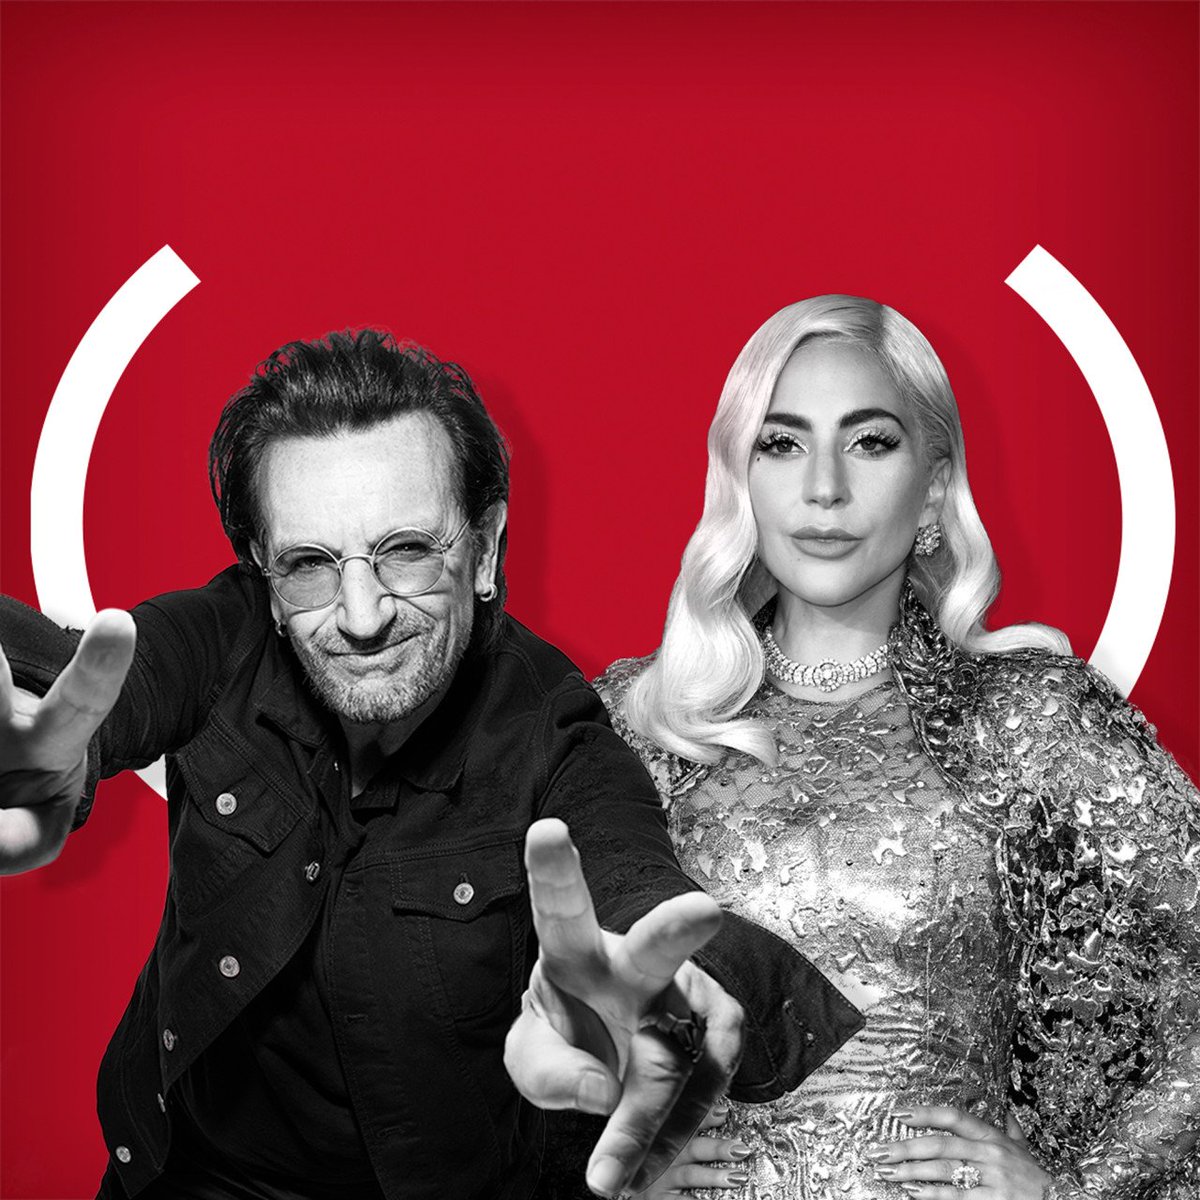 Bono & @LadyGaga want to write a song about YOU. They'll find out everything there is to know about you & then write you your very own medley. Donate $10 to @RED to ENTER: bit.ly/2FxwfEW